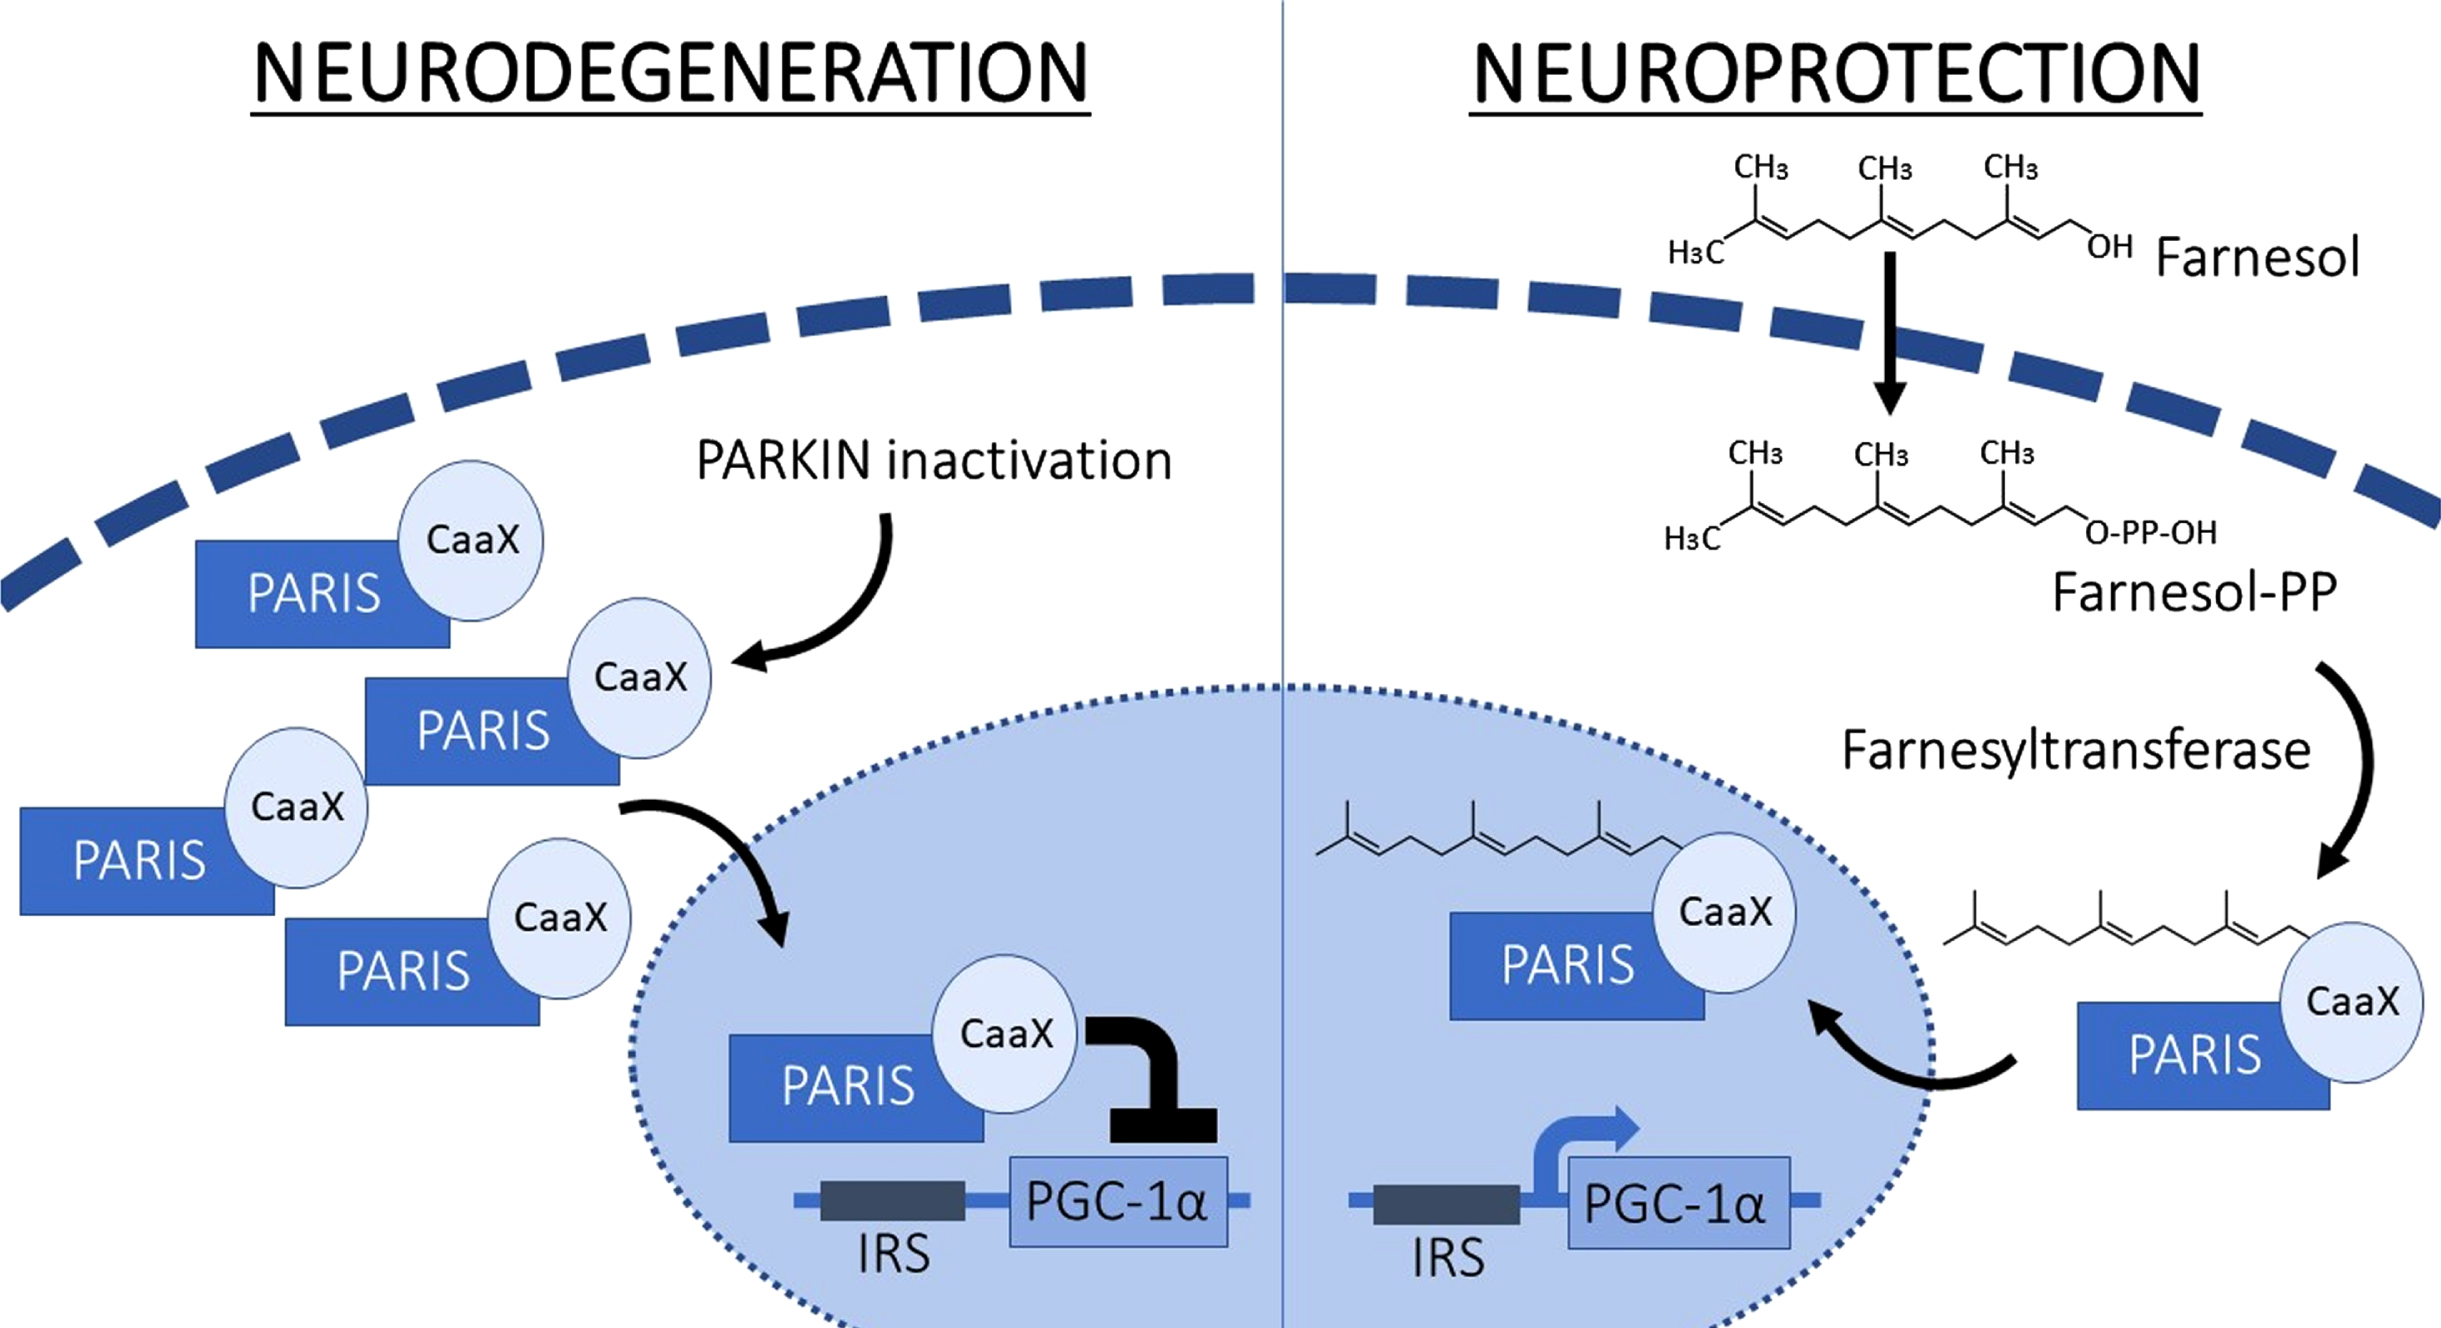 In situations when Parkin is inactivated, or there is exposure to malformed fibrils of alpha synuclein, the level of PARIS increases, which directly leads to transcriptional suppression of PGC-1α, causing reduced mitochondrial function and thus furthering neurodegeneration. Farnesol however fosters the farnesylation of PARIS, thereby intercepting occupancy of PARIS on the PGC-1α promoter which leads to higher levels of PGC-1α and consequently promotes neuroprotection. IRS, insulin response sequences; Farnesyl-PP, Farnesyl diphosphate.